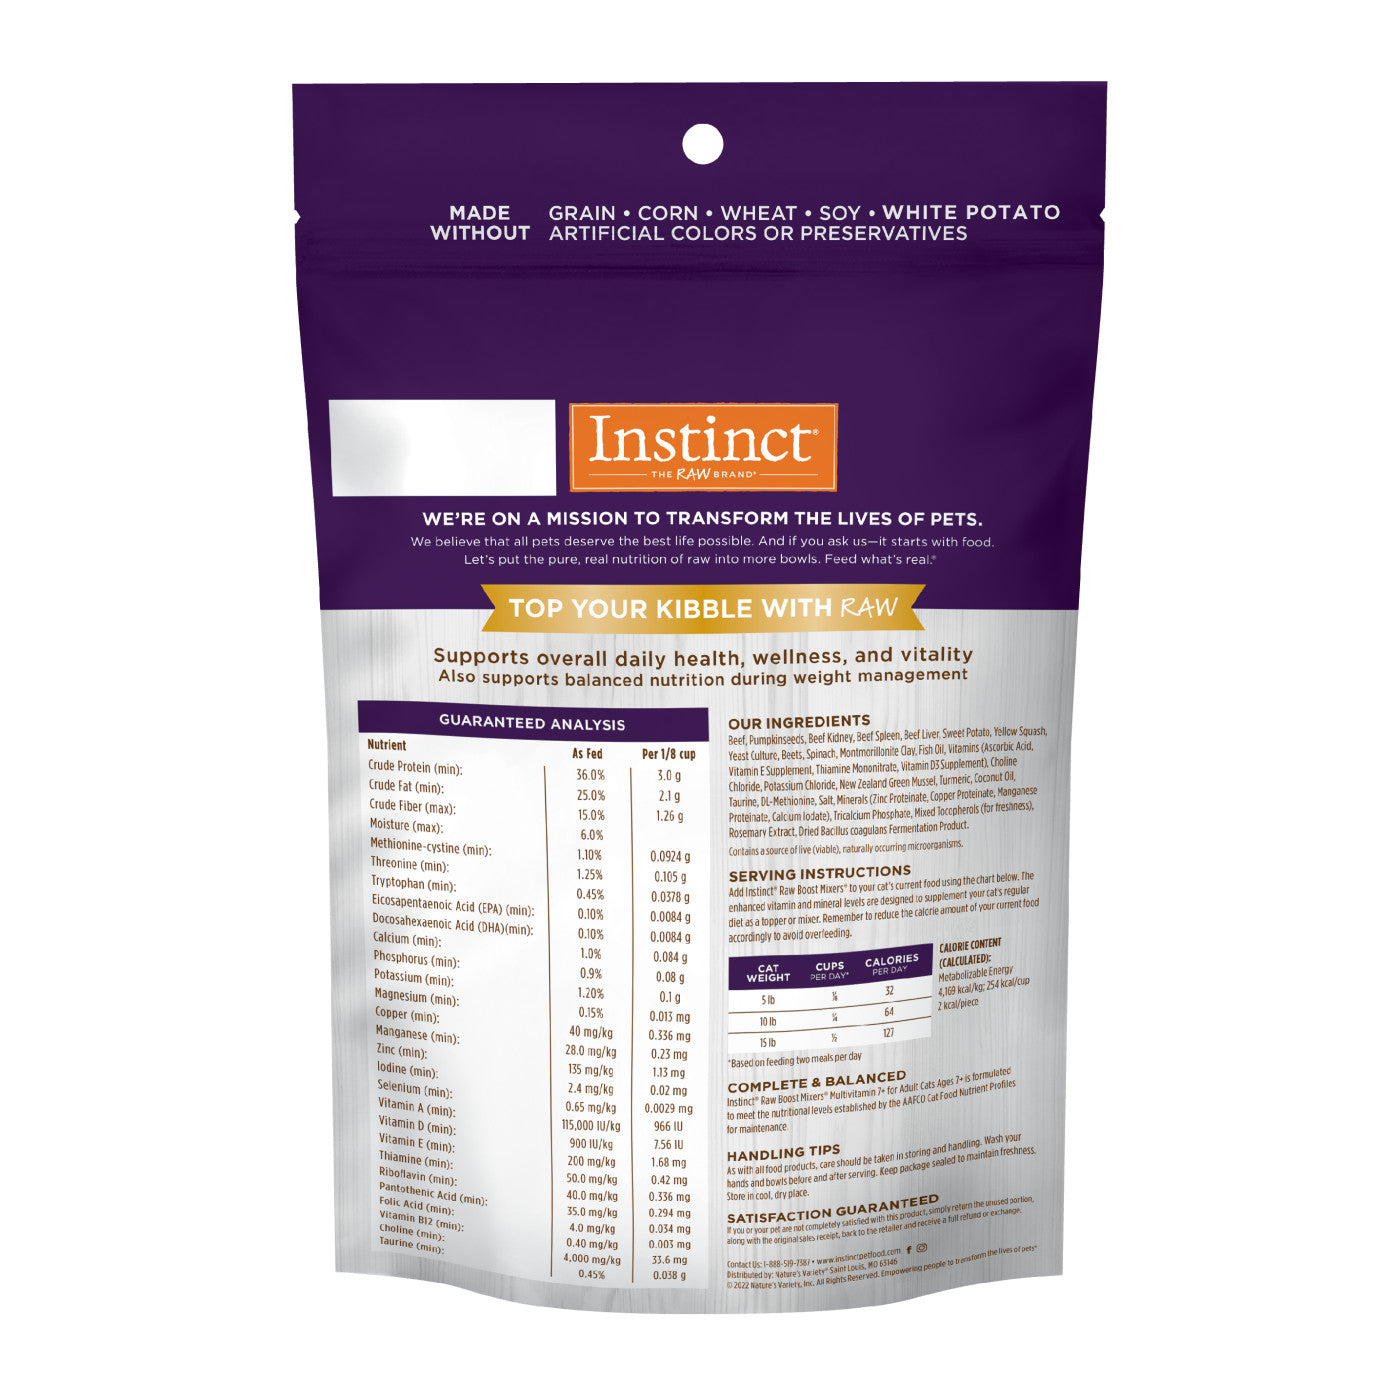 Instinct - Raw Boost - Multivitamin (For Cats Ages 7+)